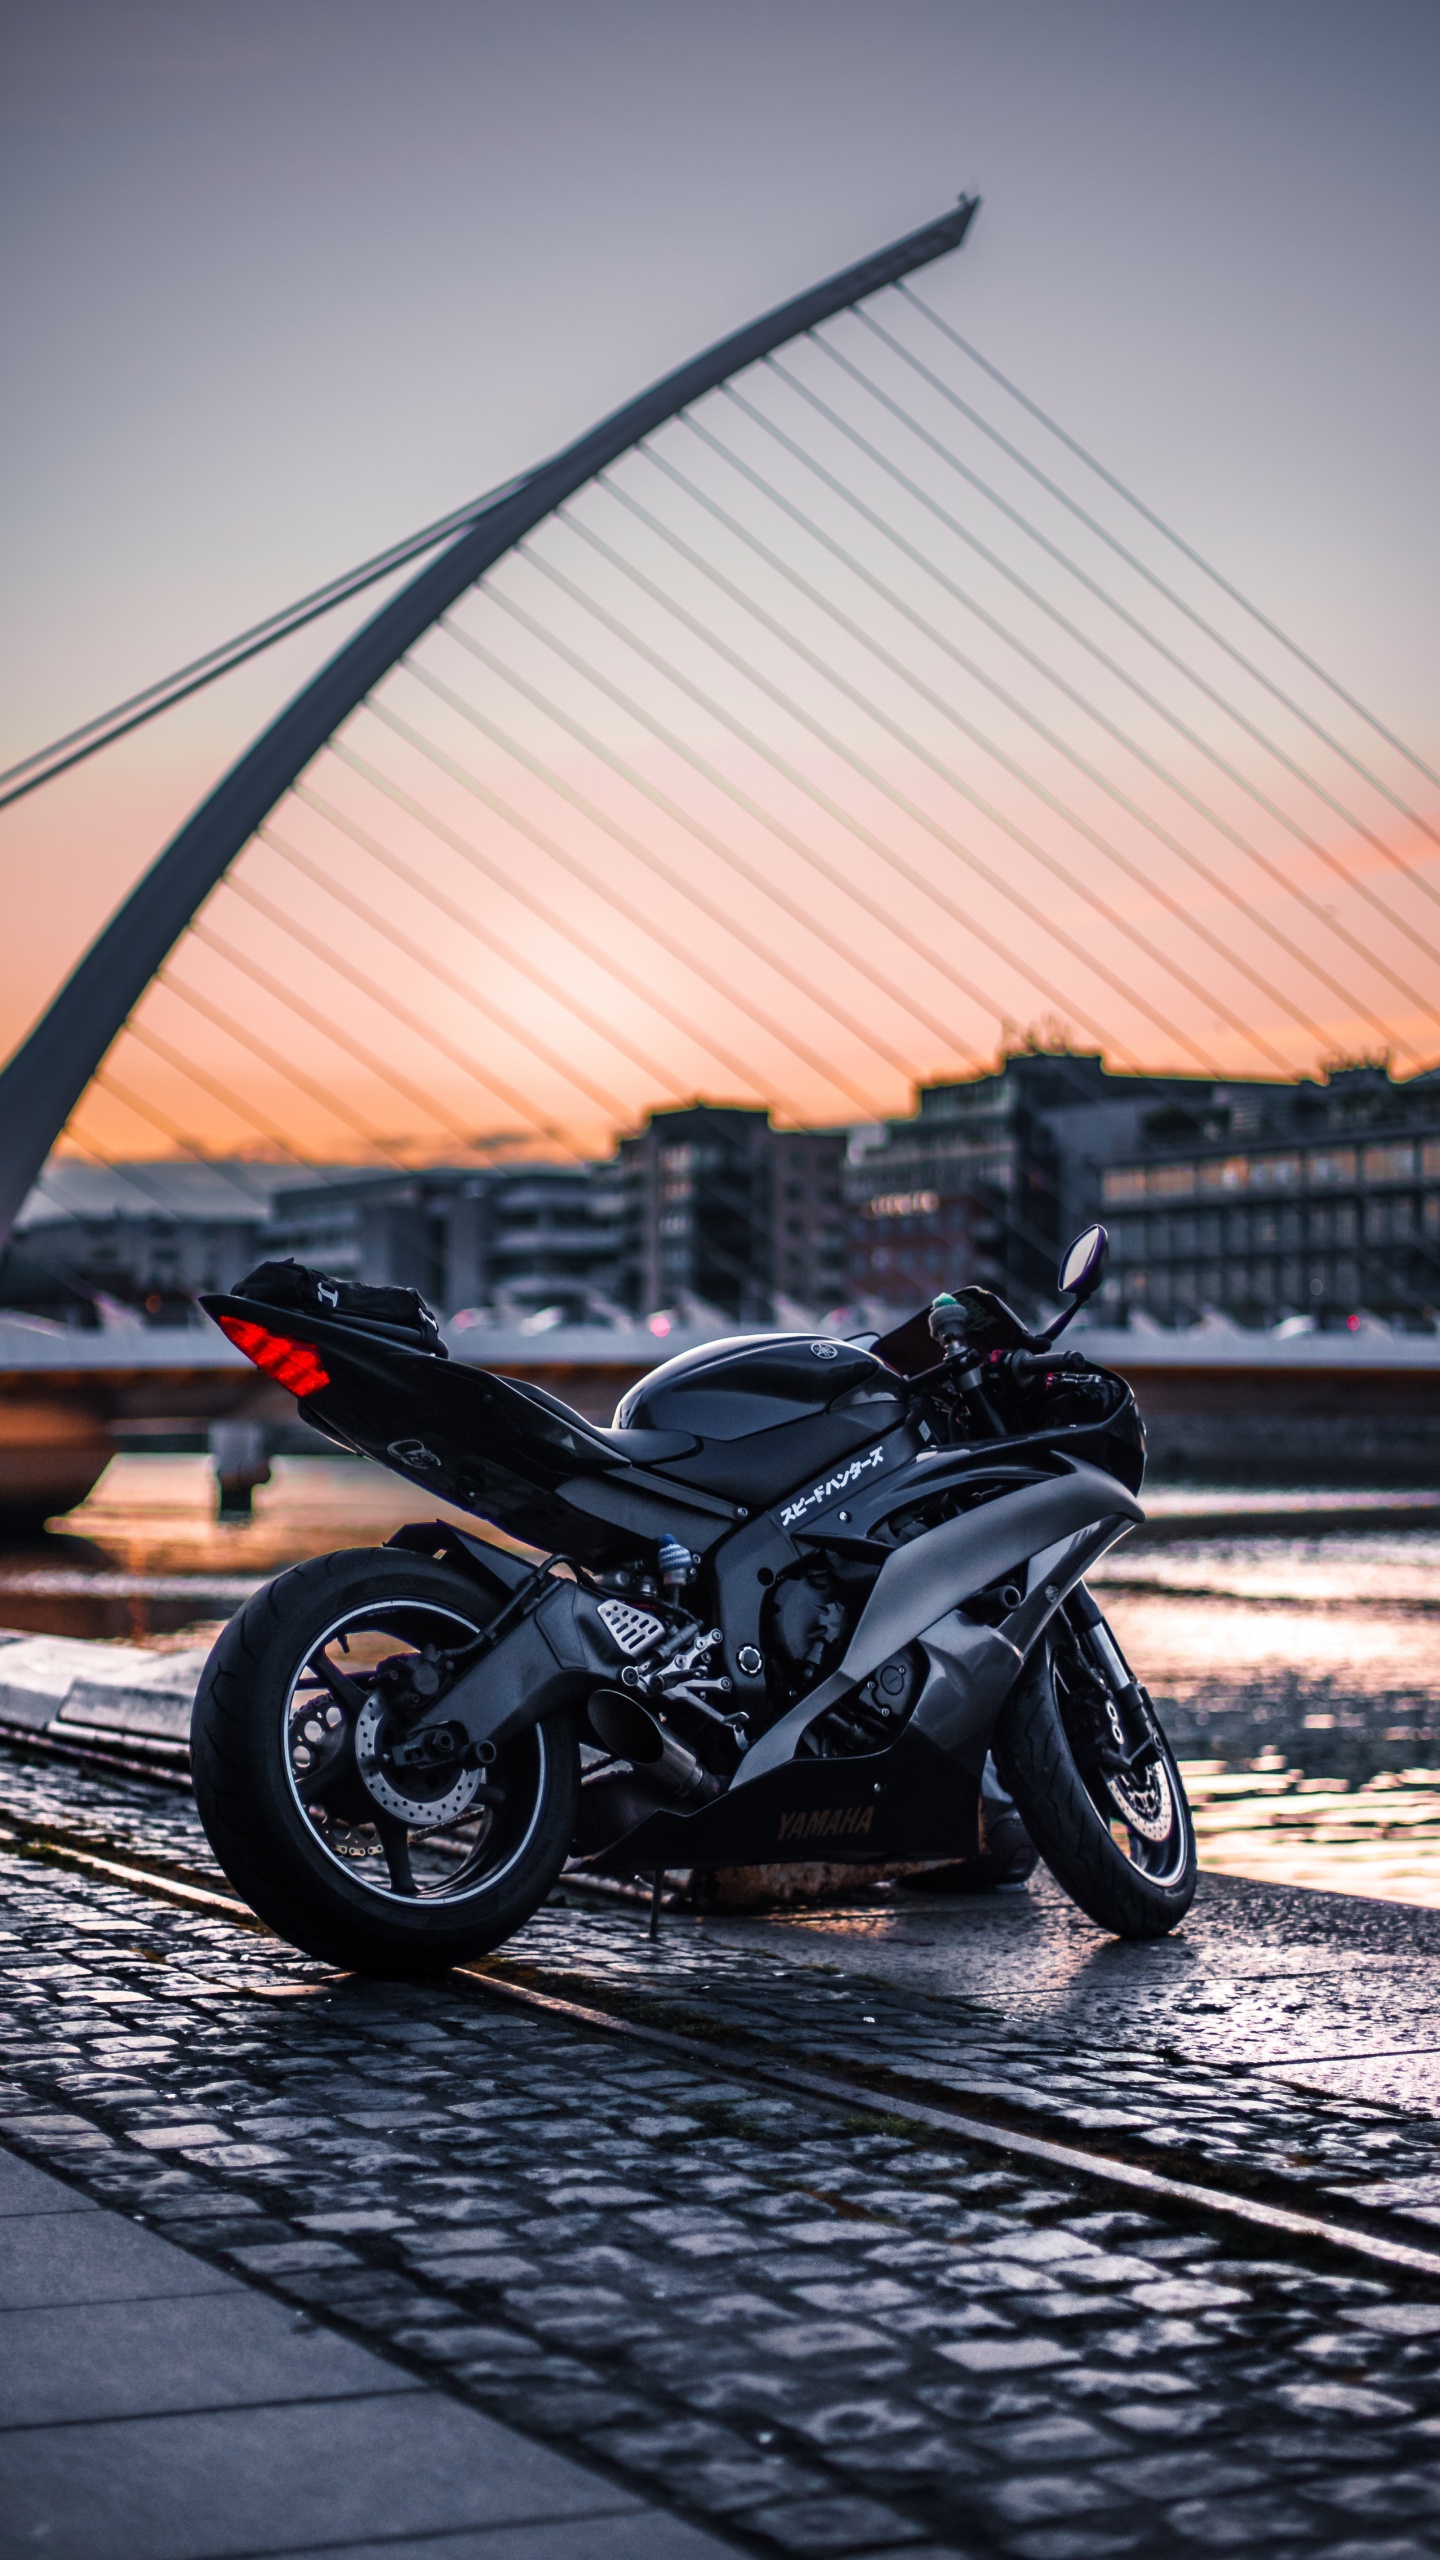 Black Sports Bike Parked on The Side of The Road. Wallpaper in 1440x2560 Resolution